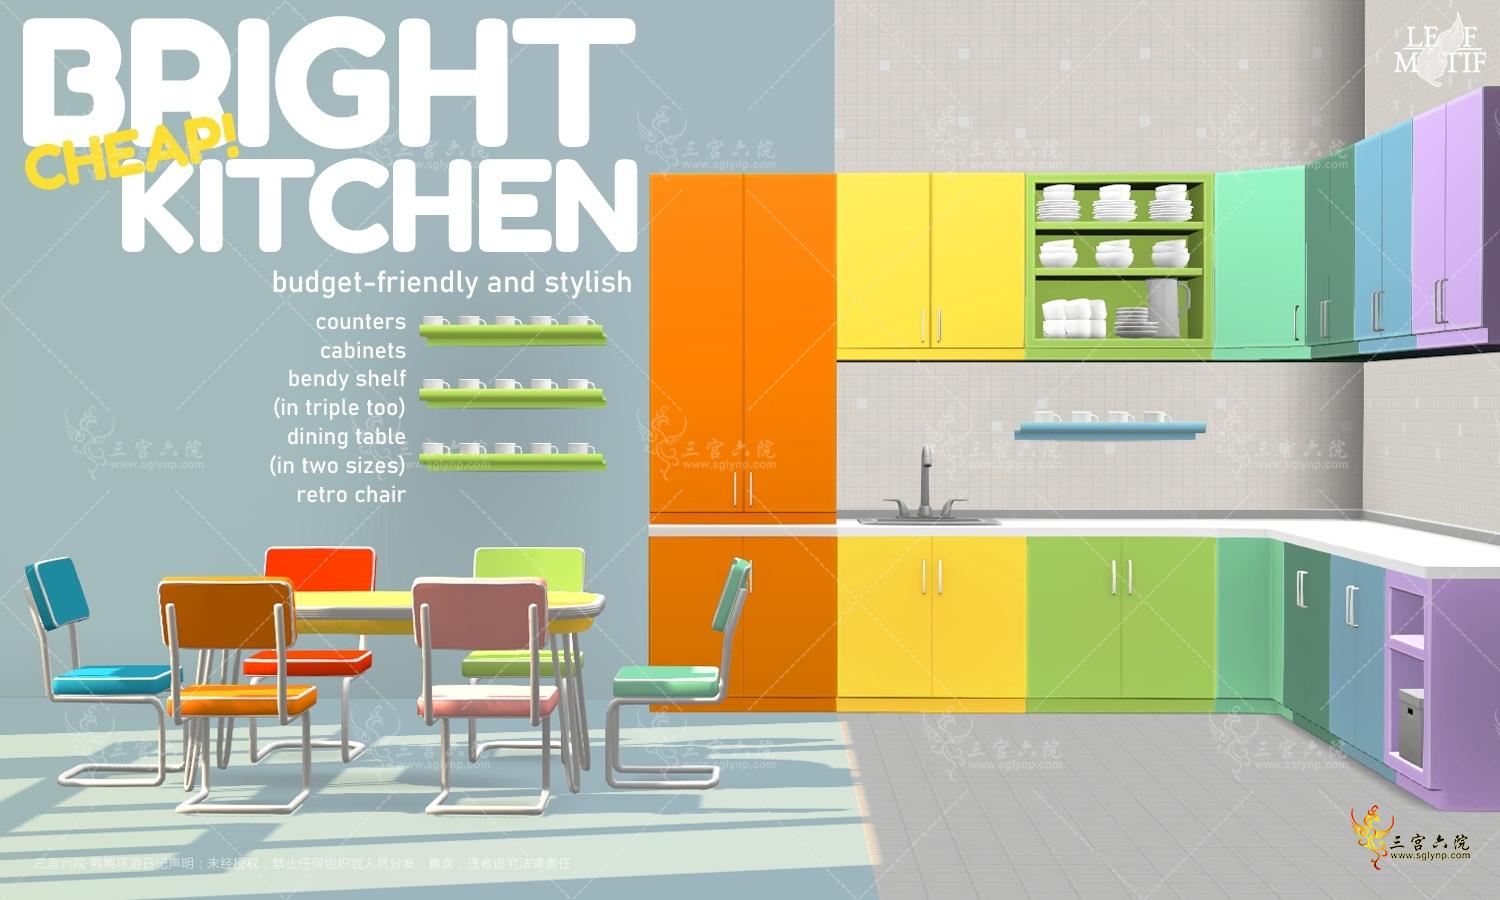 brightkitchenpreview1.png